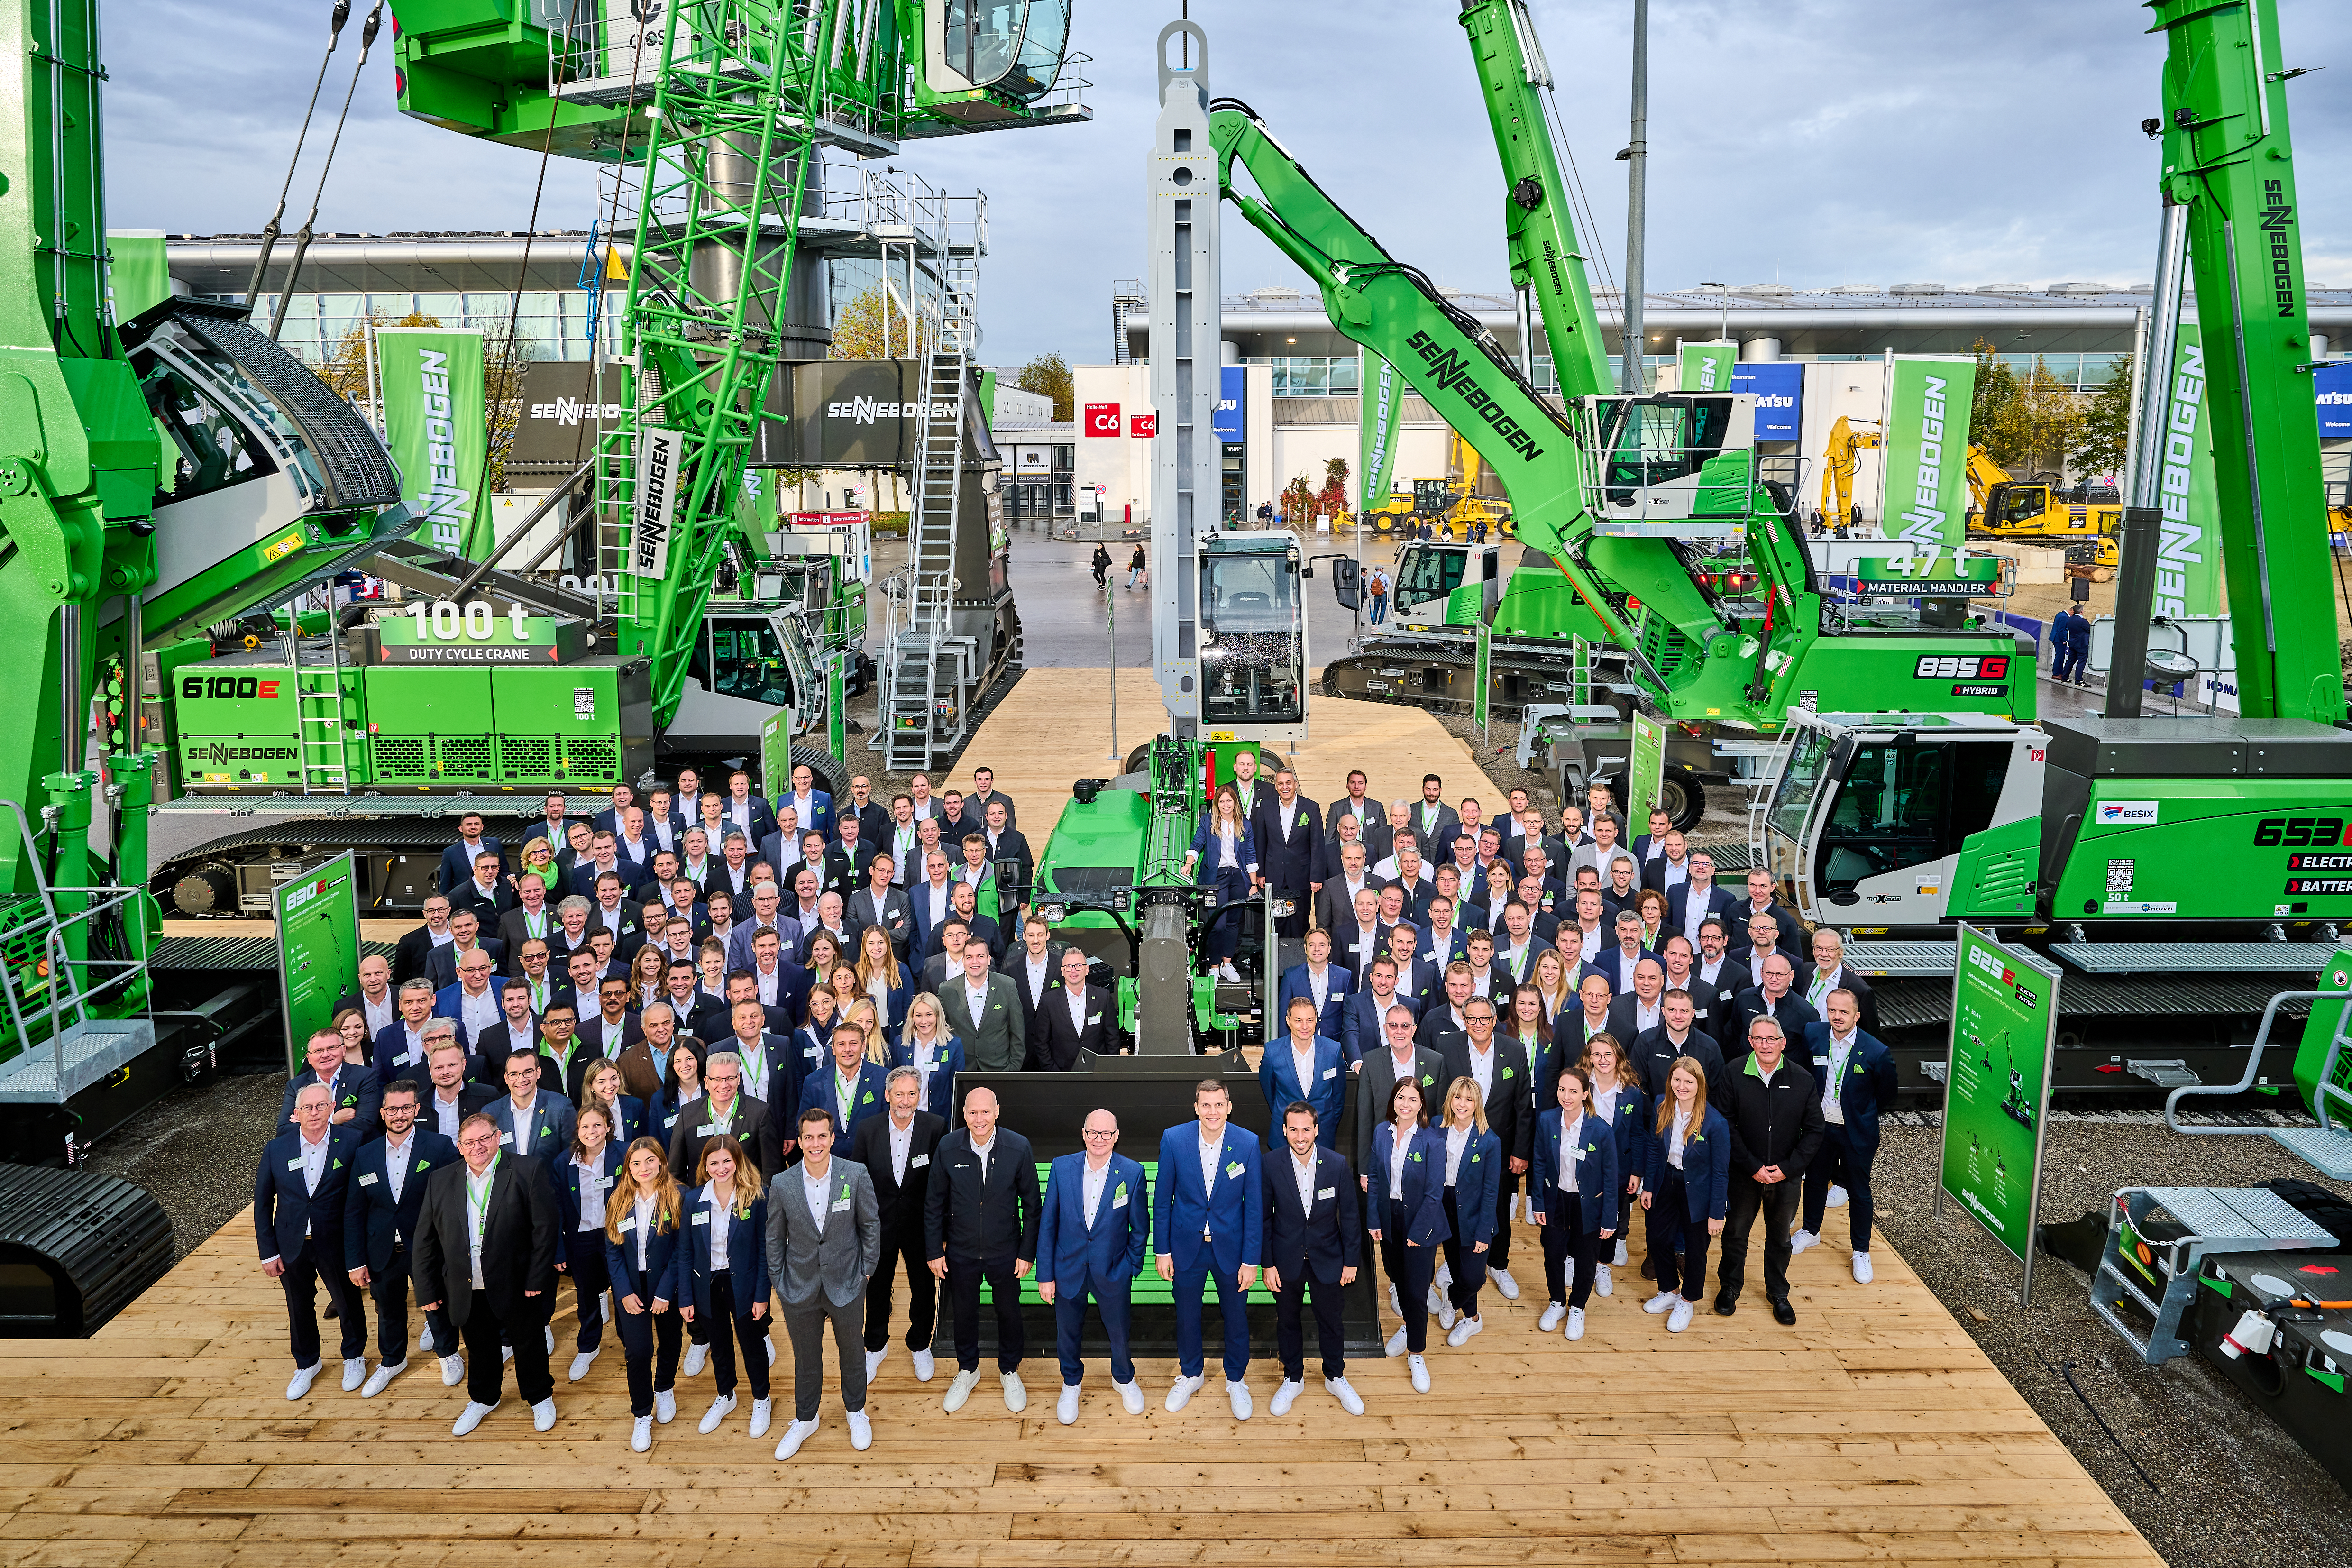 SENNEBOGEN guarantees worldwide presence with more than 180 international sales partners and with over 300 service points. With a large, international team and a total of 12 machine exhibits from all application areas, SENNEBOGEN also welcomed the large number of bauma trade fair visitors, which exceeded all industry expectations. 